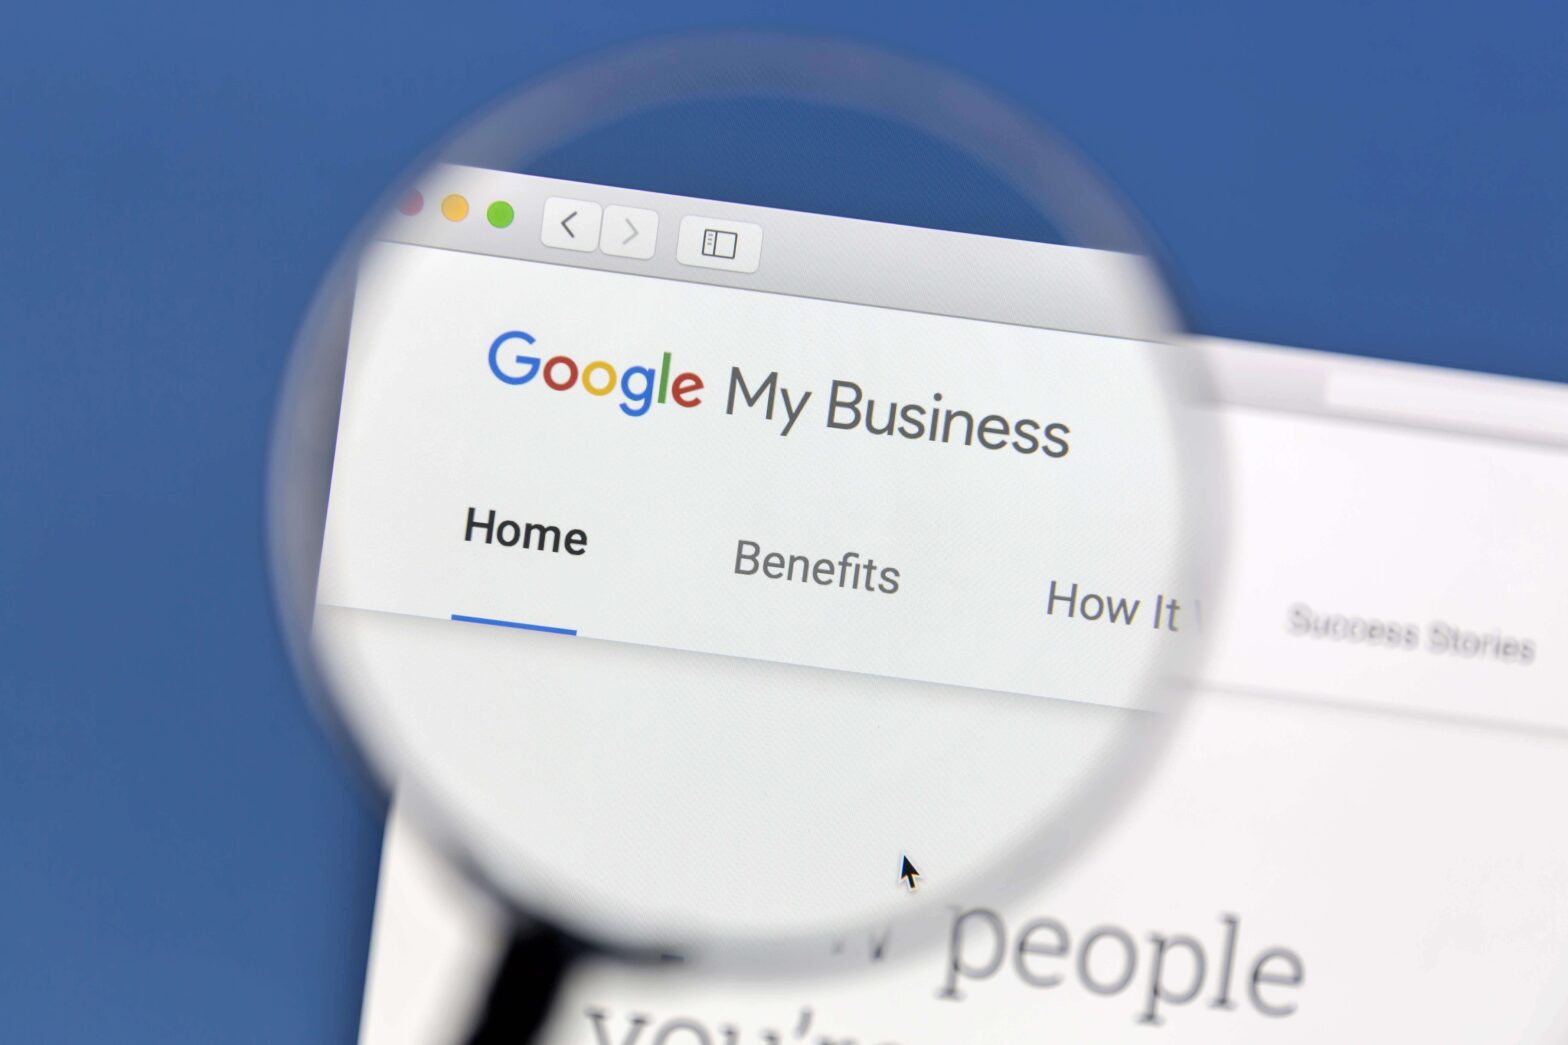 Featured image for post: Why Keeping Google My Business Services During COVID-19 is Important for the Future of Your Business.